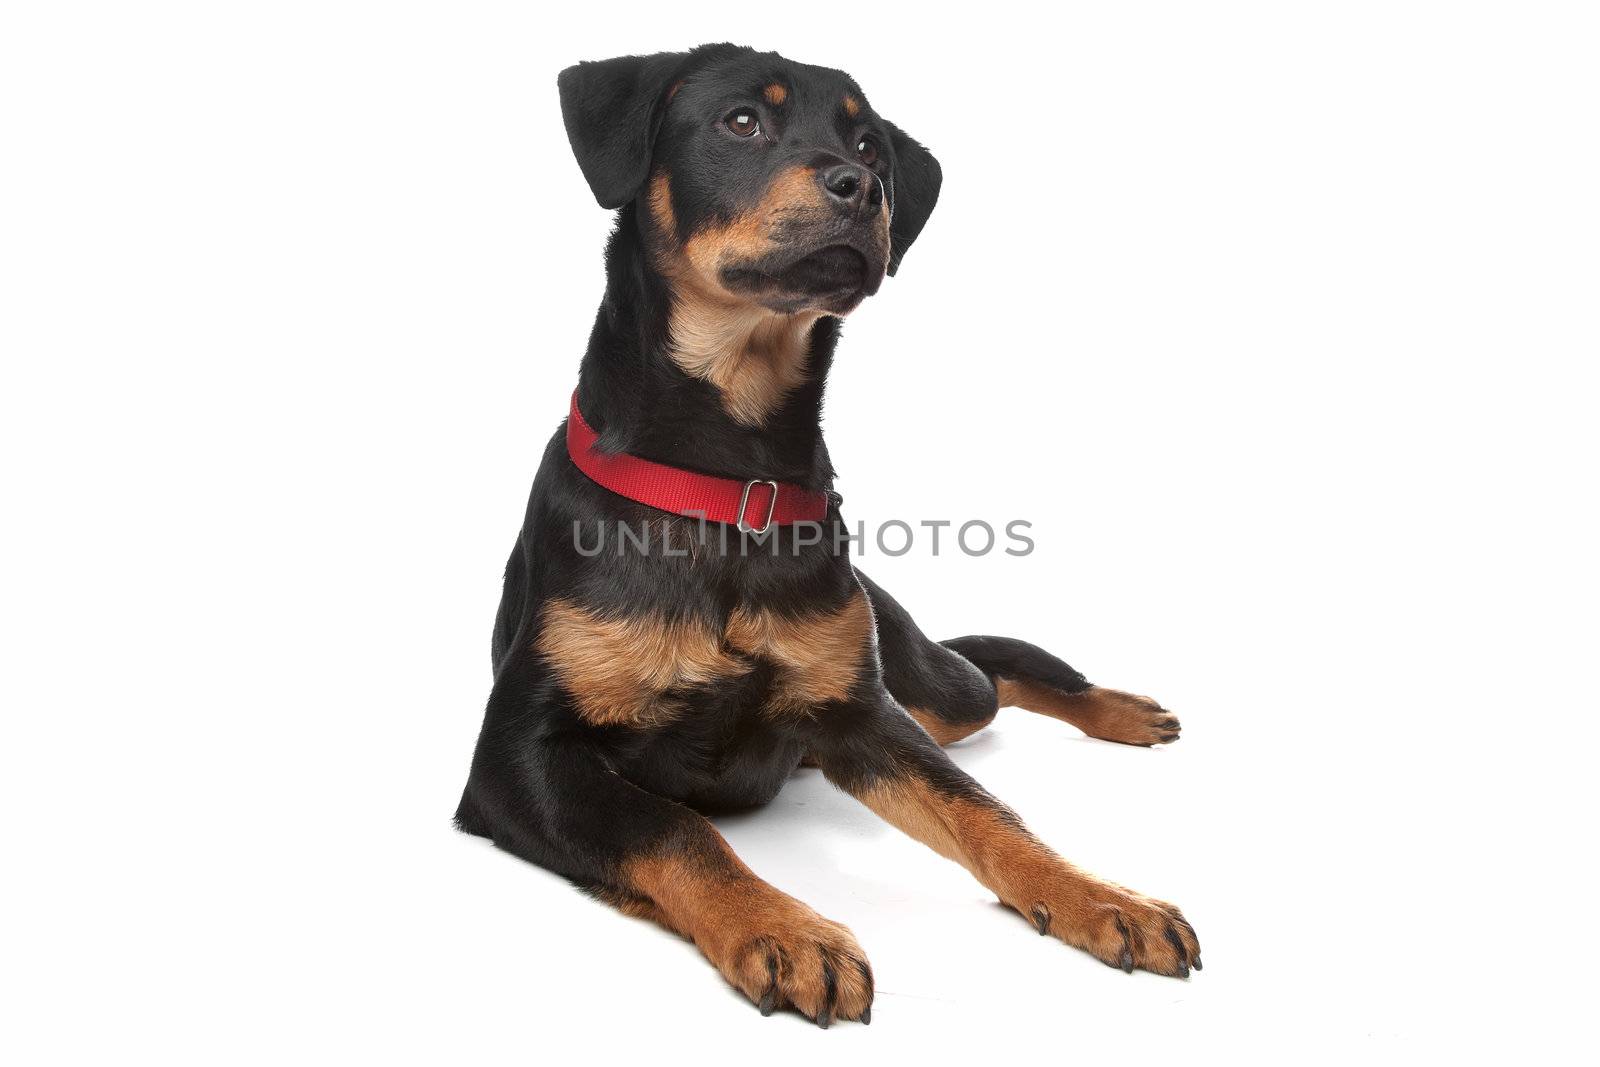 Rottweiler puppy in front of a white background